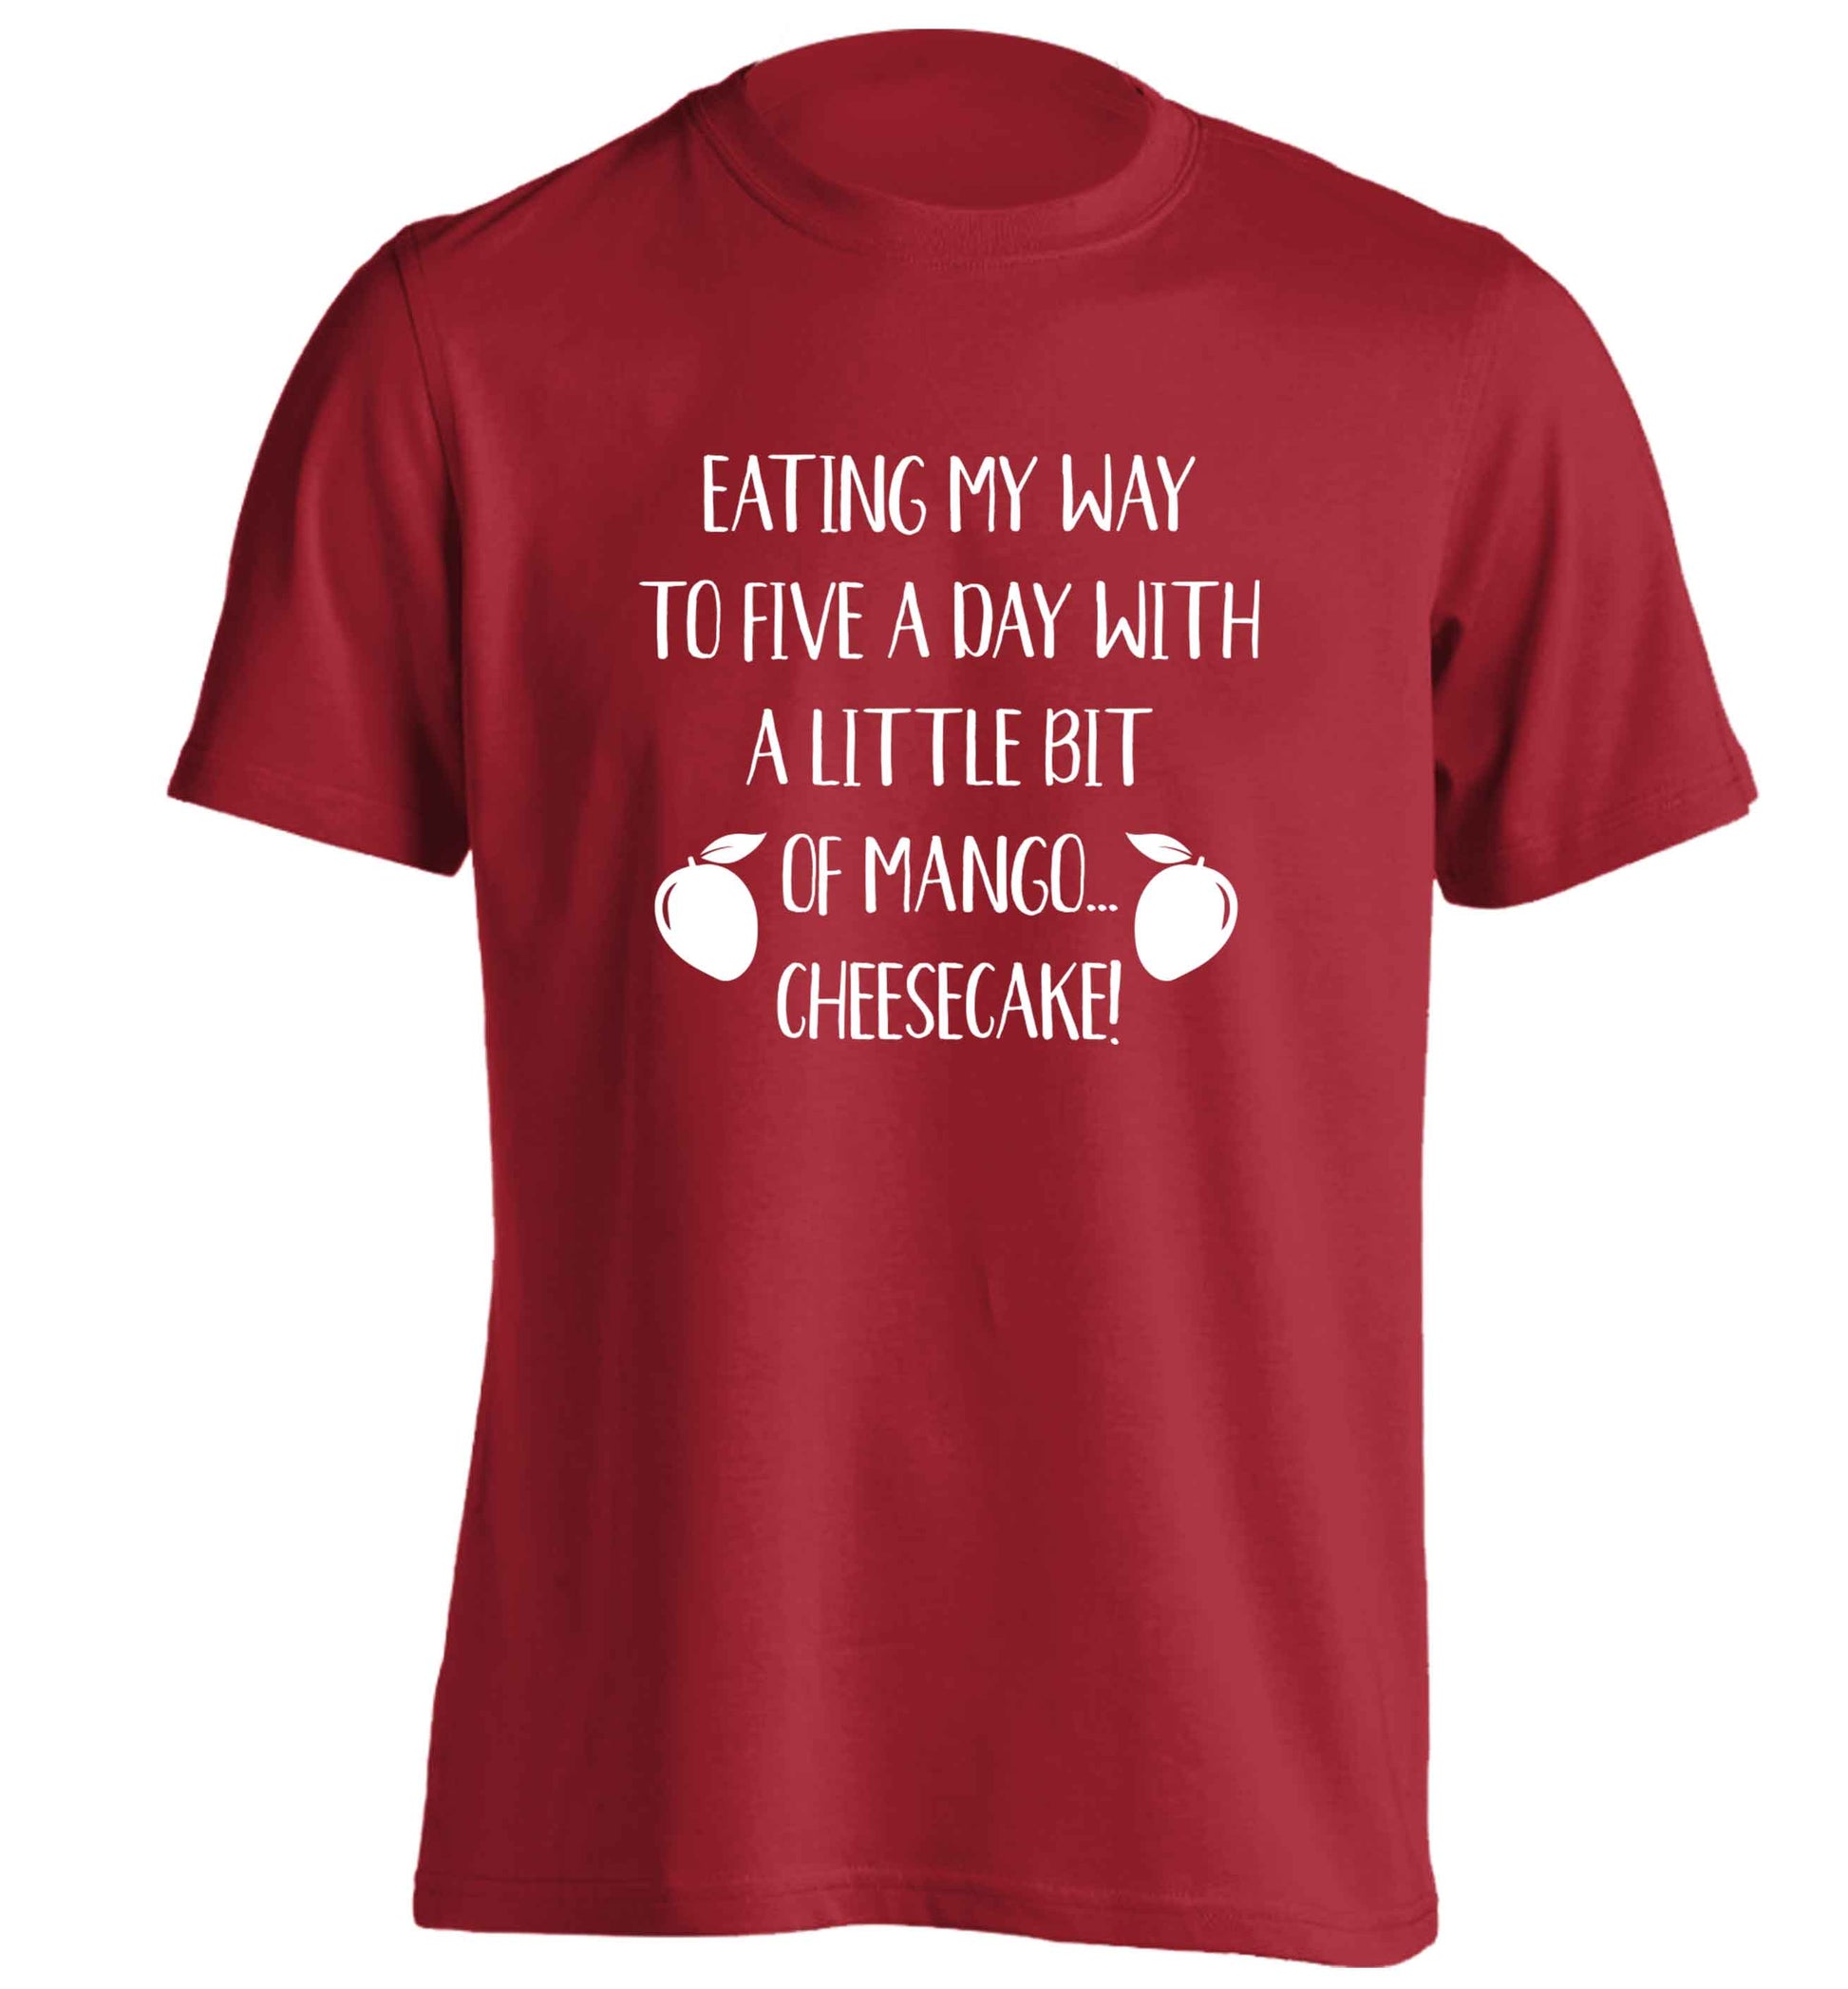 Eating my way to five a day with a little bit of mango cheesecake adults unisex red Tshirt 2XL